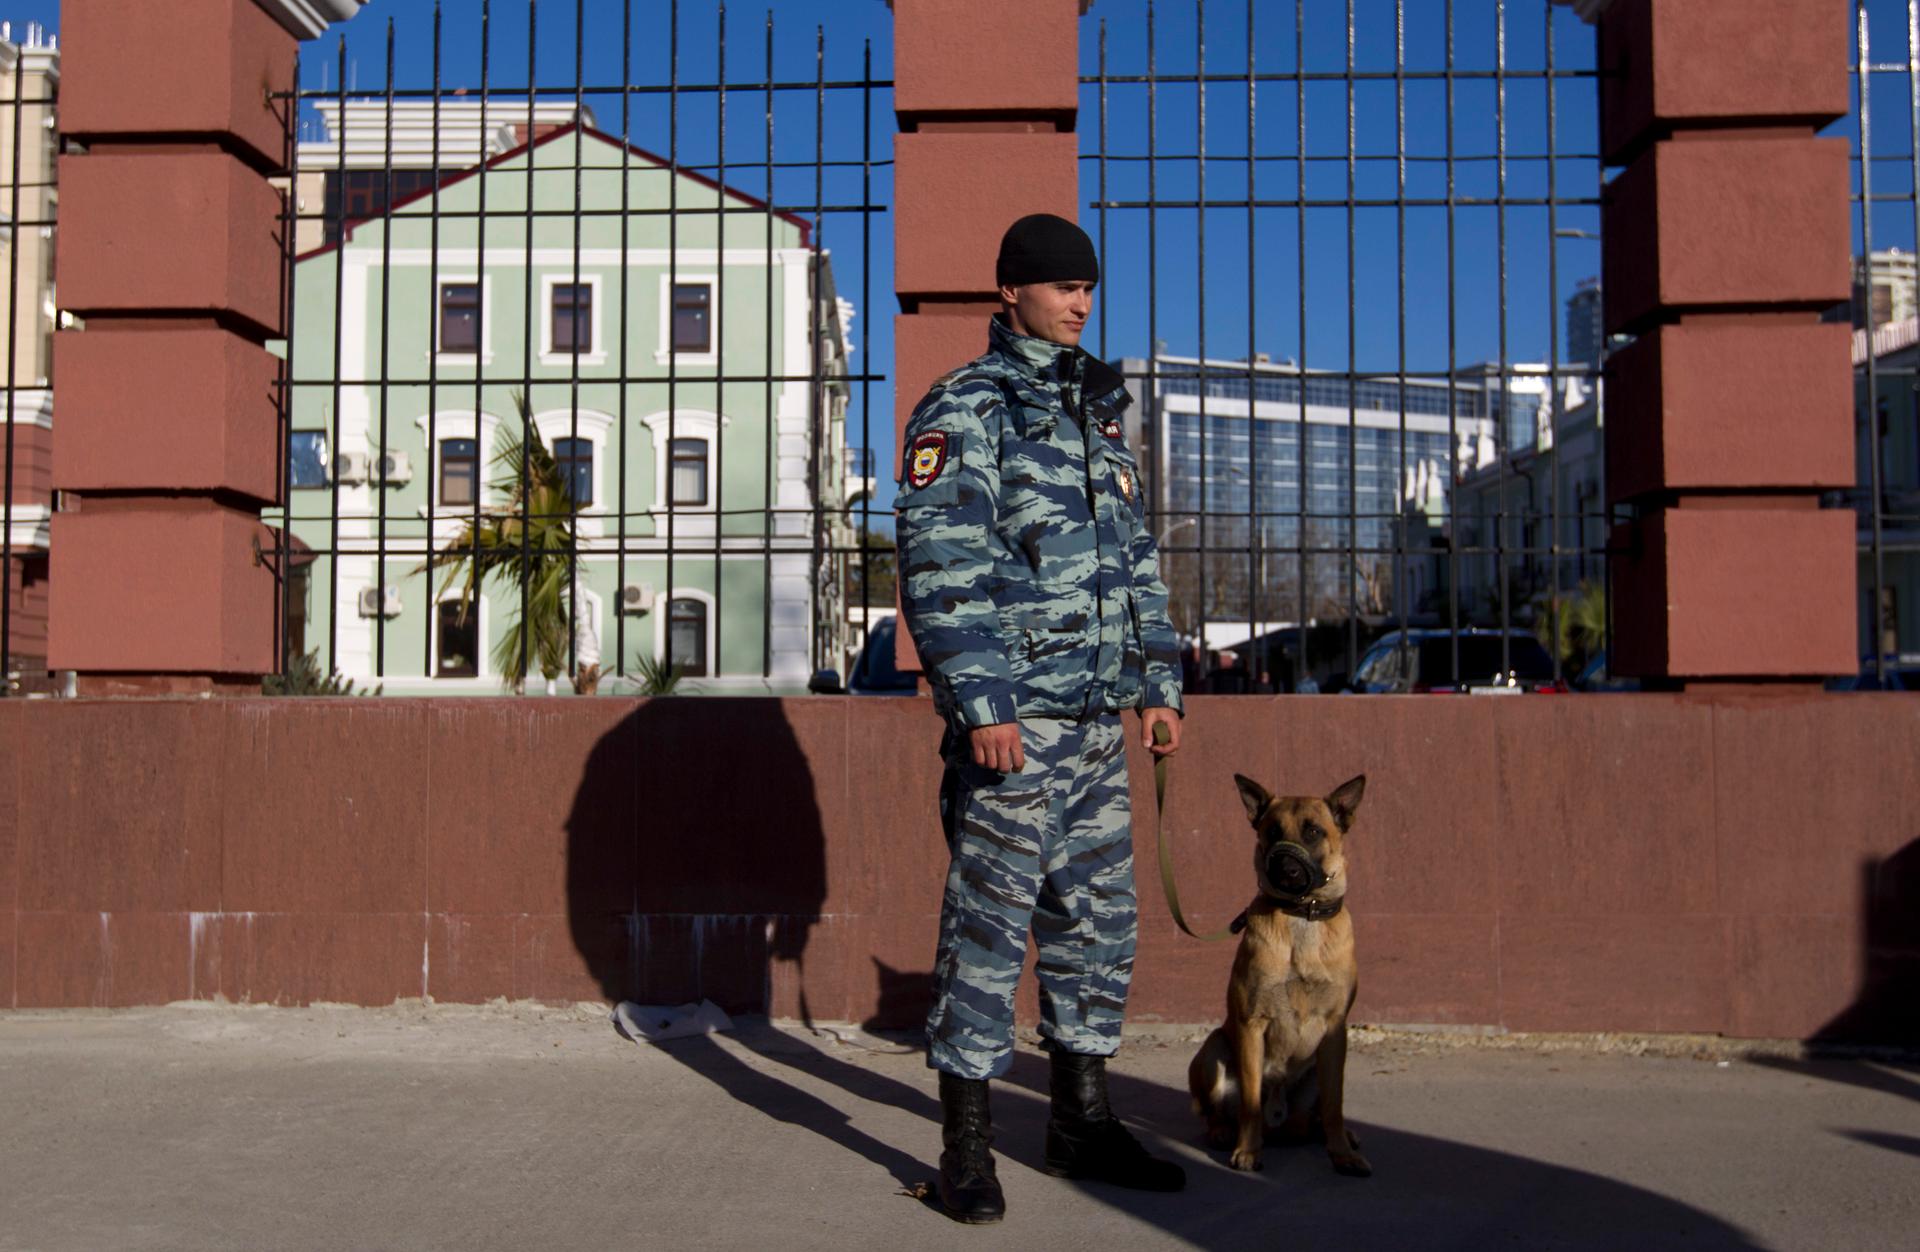 One of the roughly 40,000 Russian police and security agents on duty in Sochi.